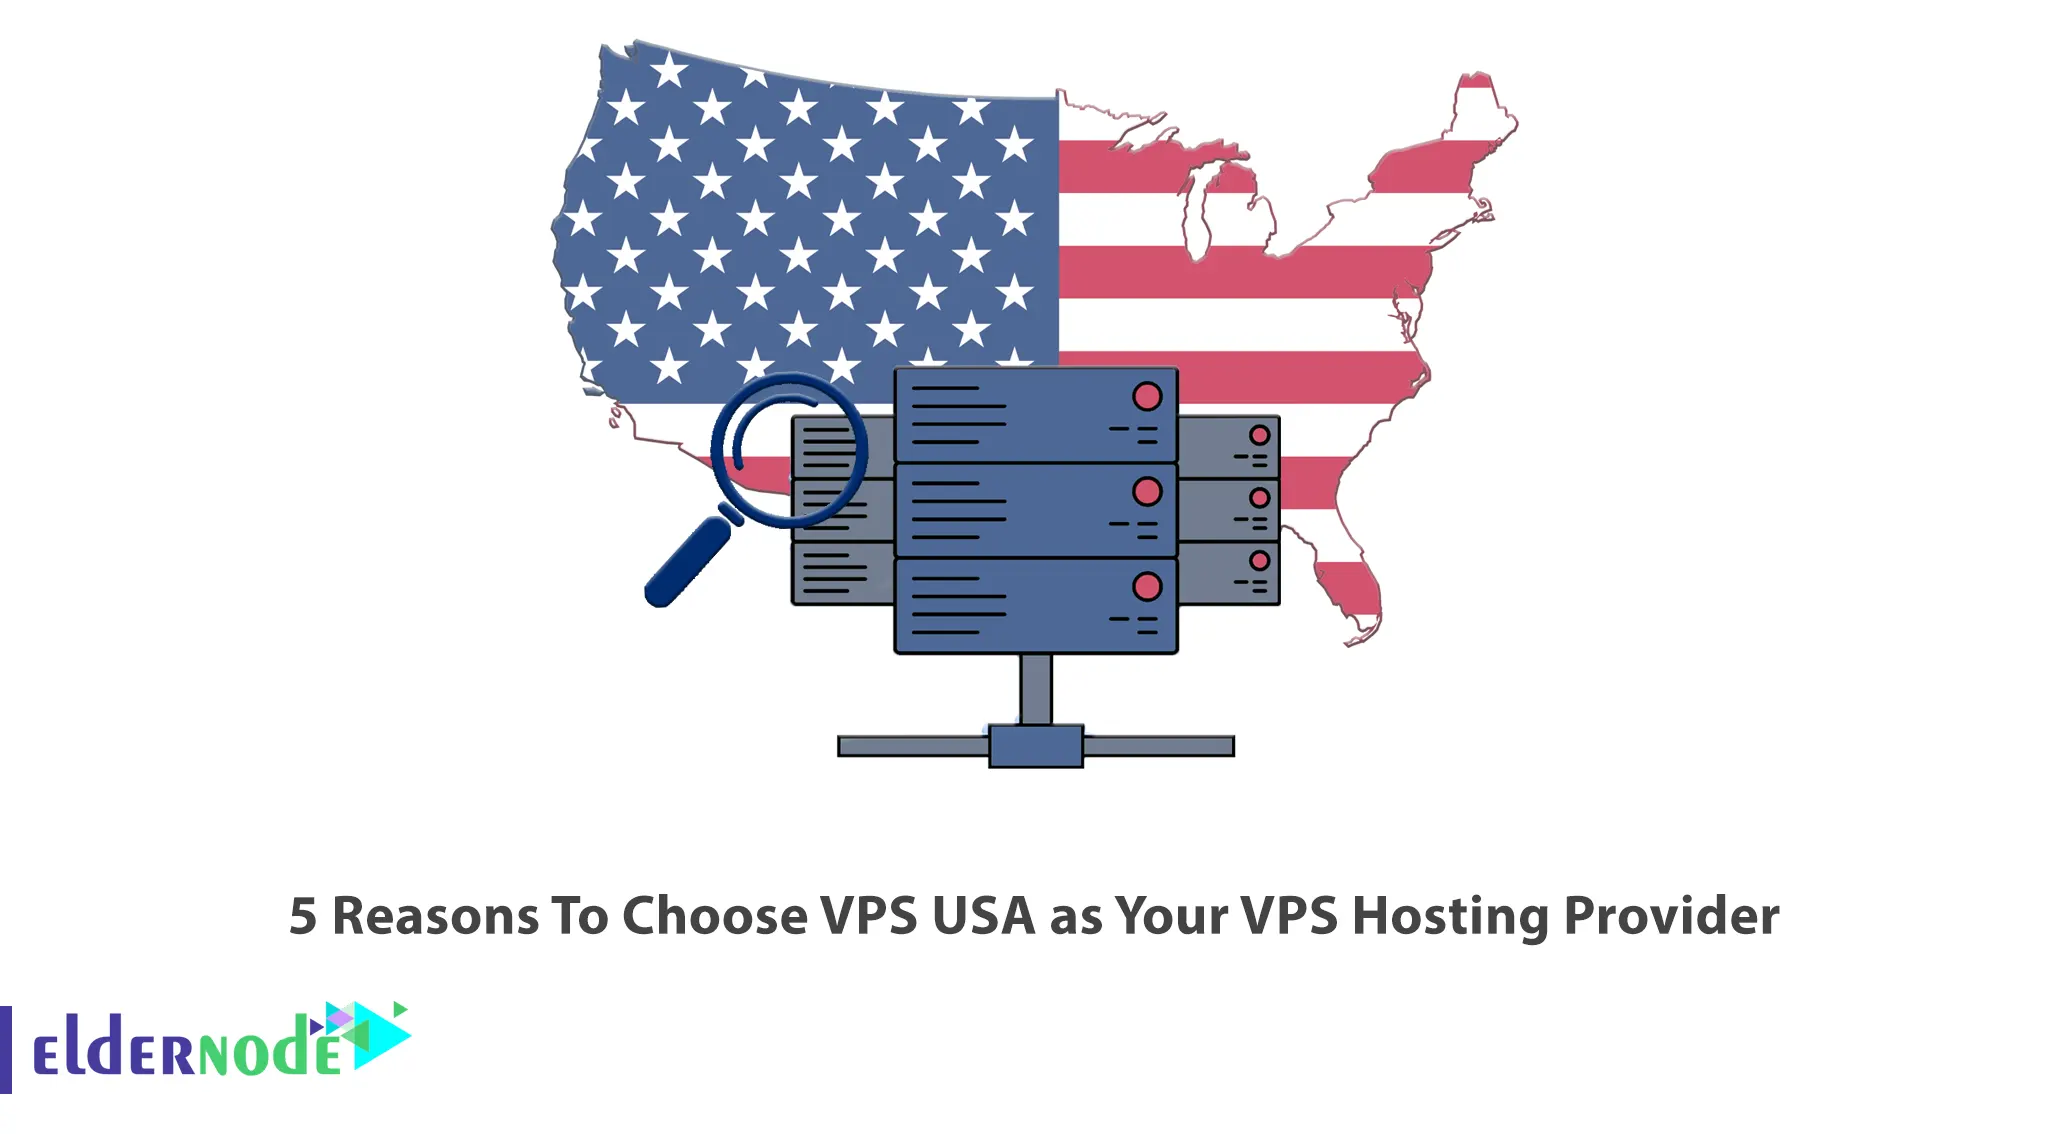 5 Reasons To Choose VPS USA as Your VPS Hosting Provider